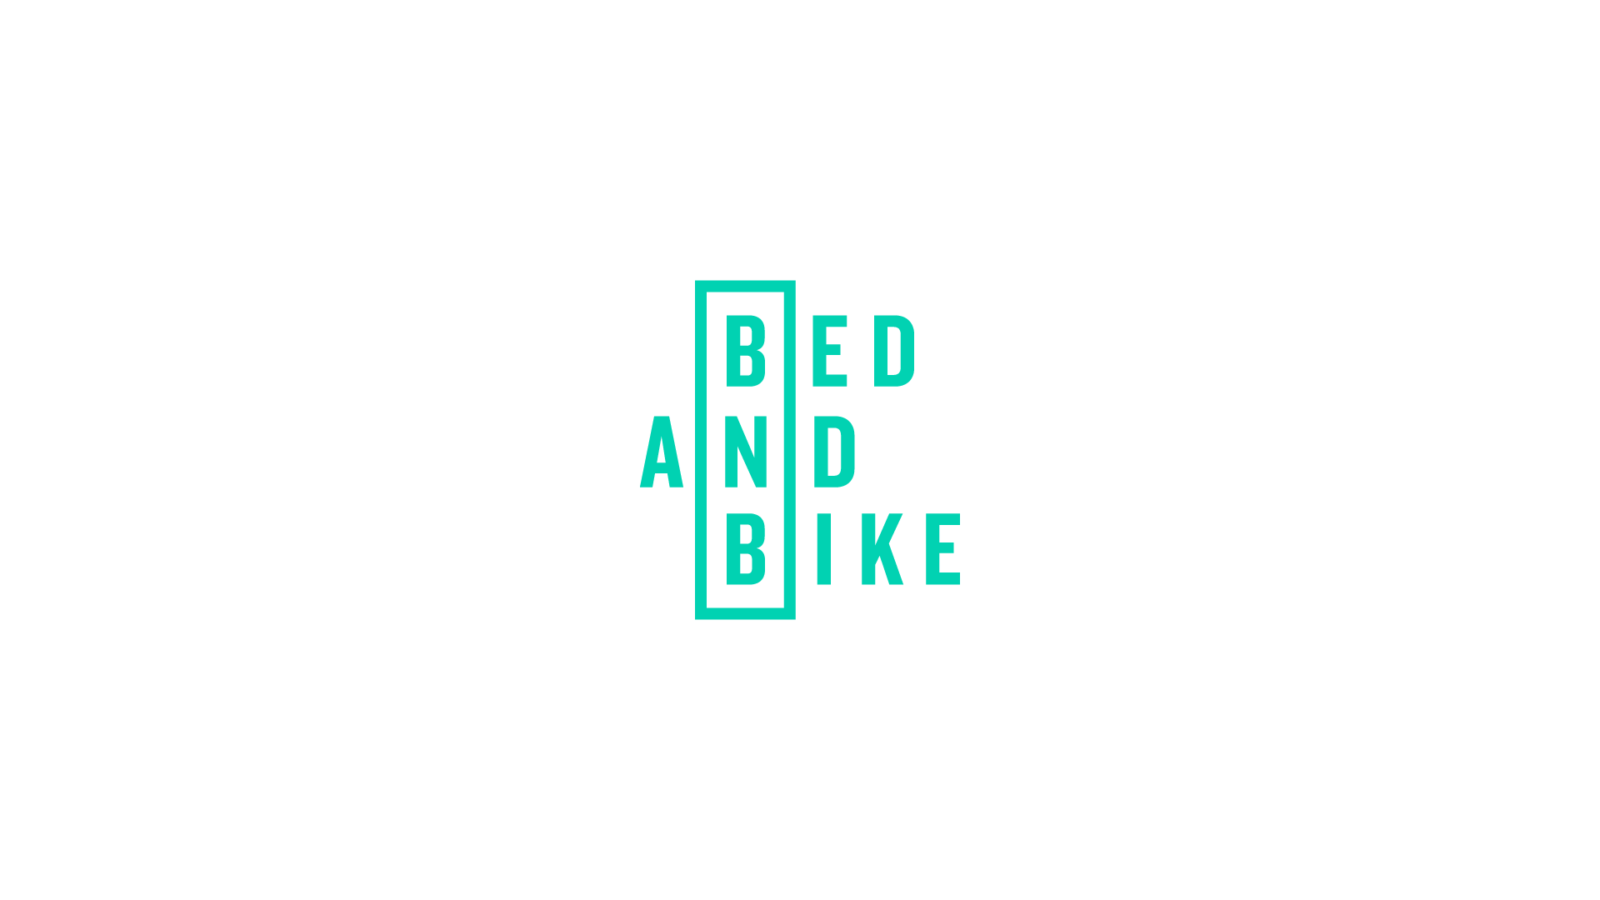 Boutique Hotel Branding for Bed and Bike